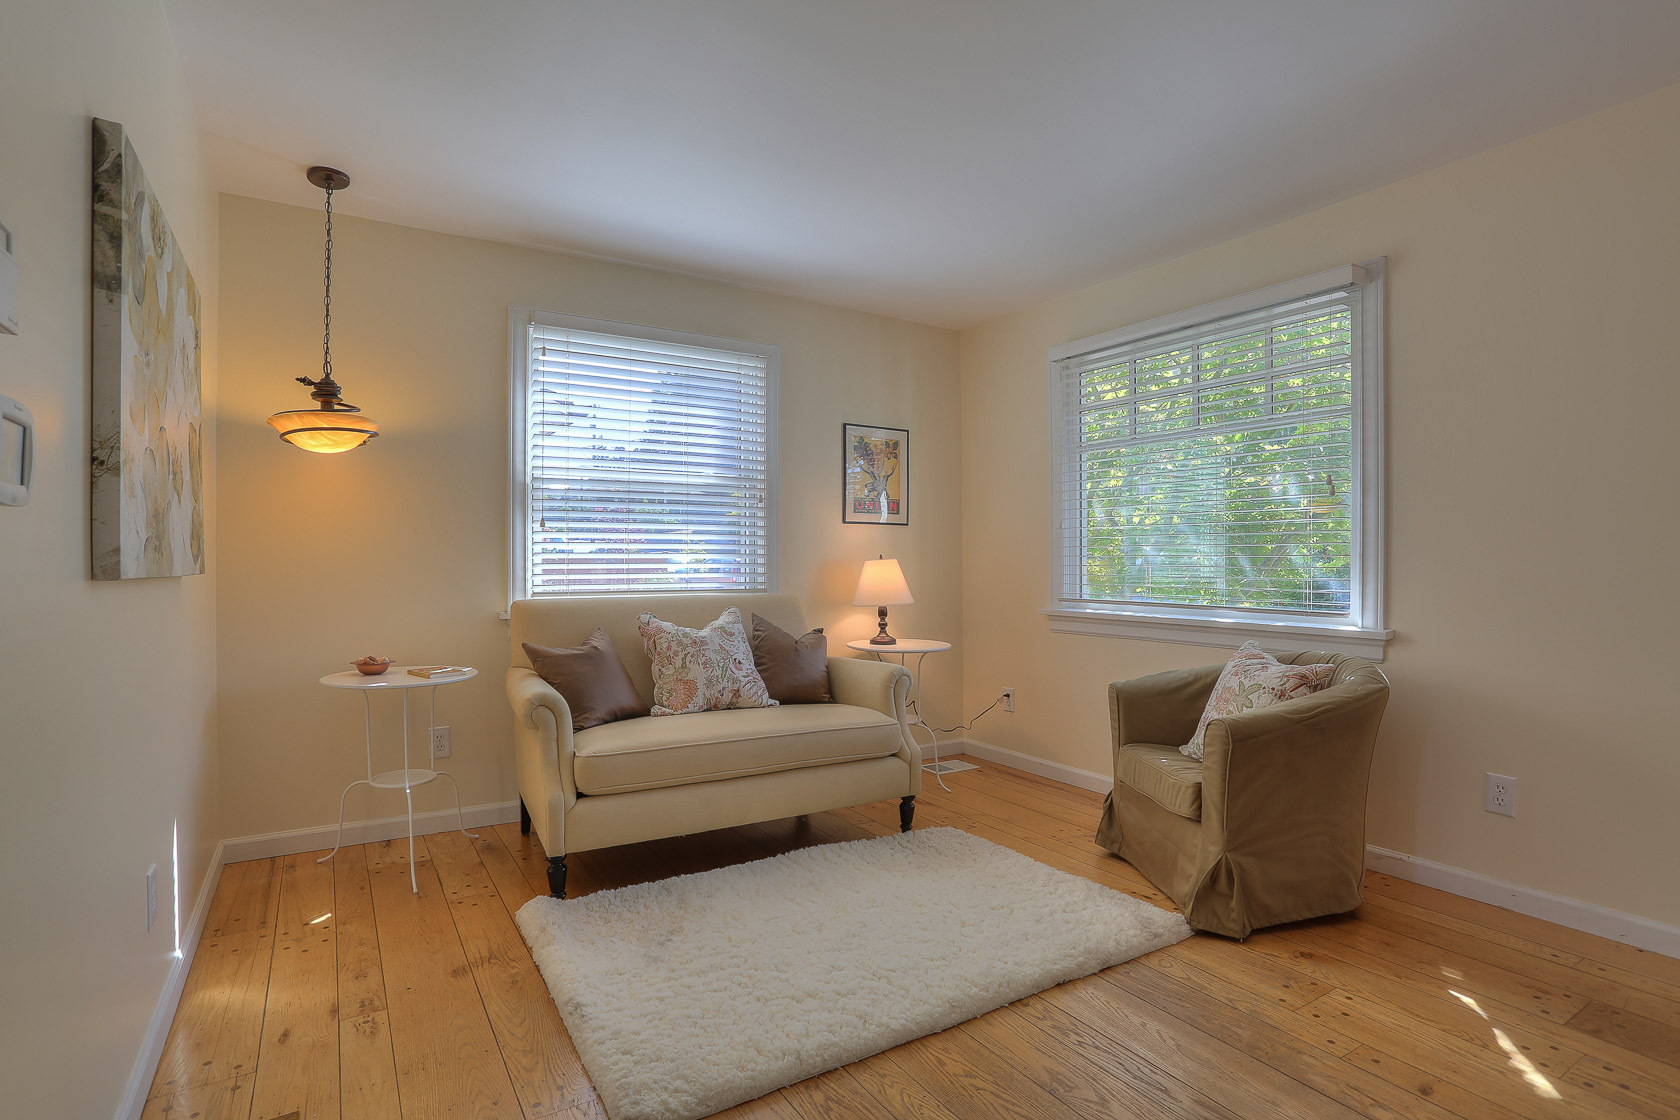 Property Photo: Living room 8386 31st Ave NW  WA 98117 